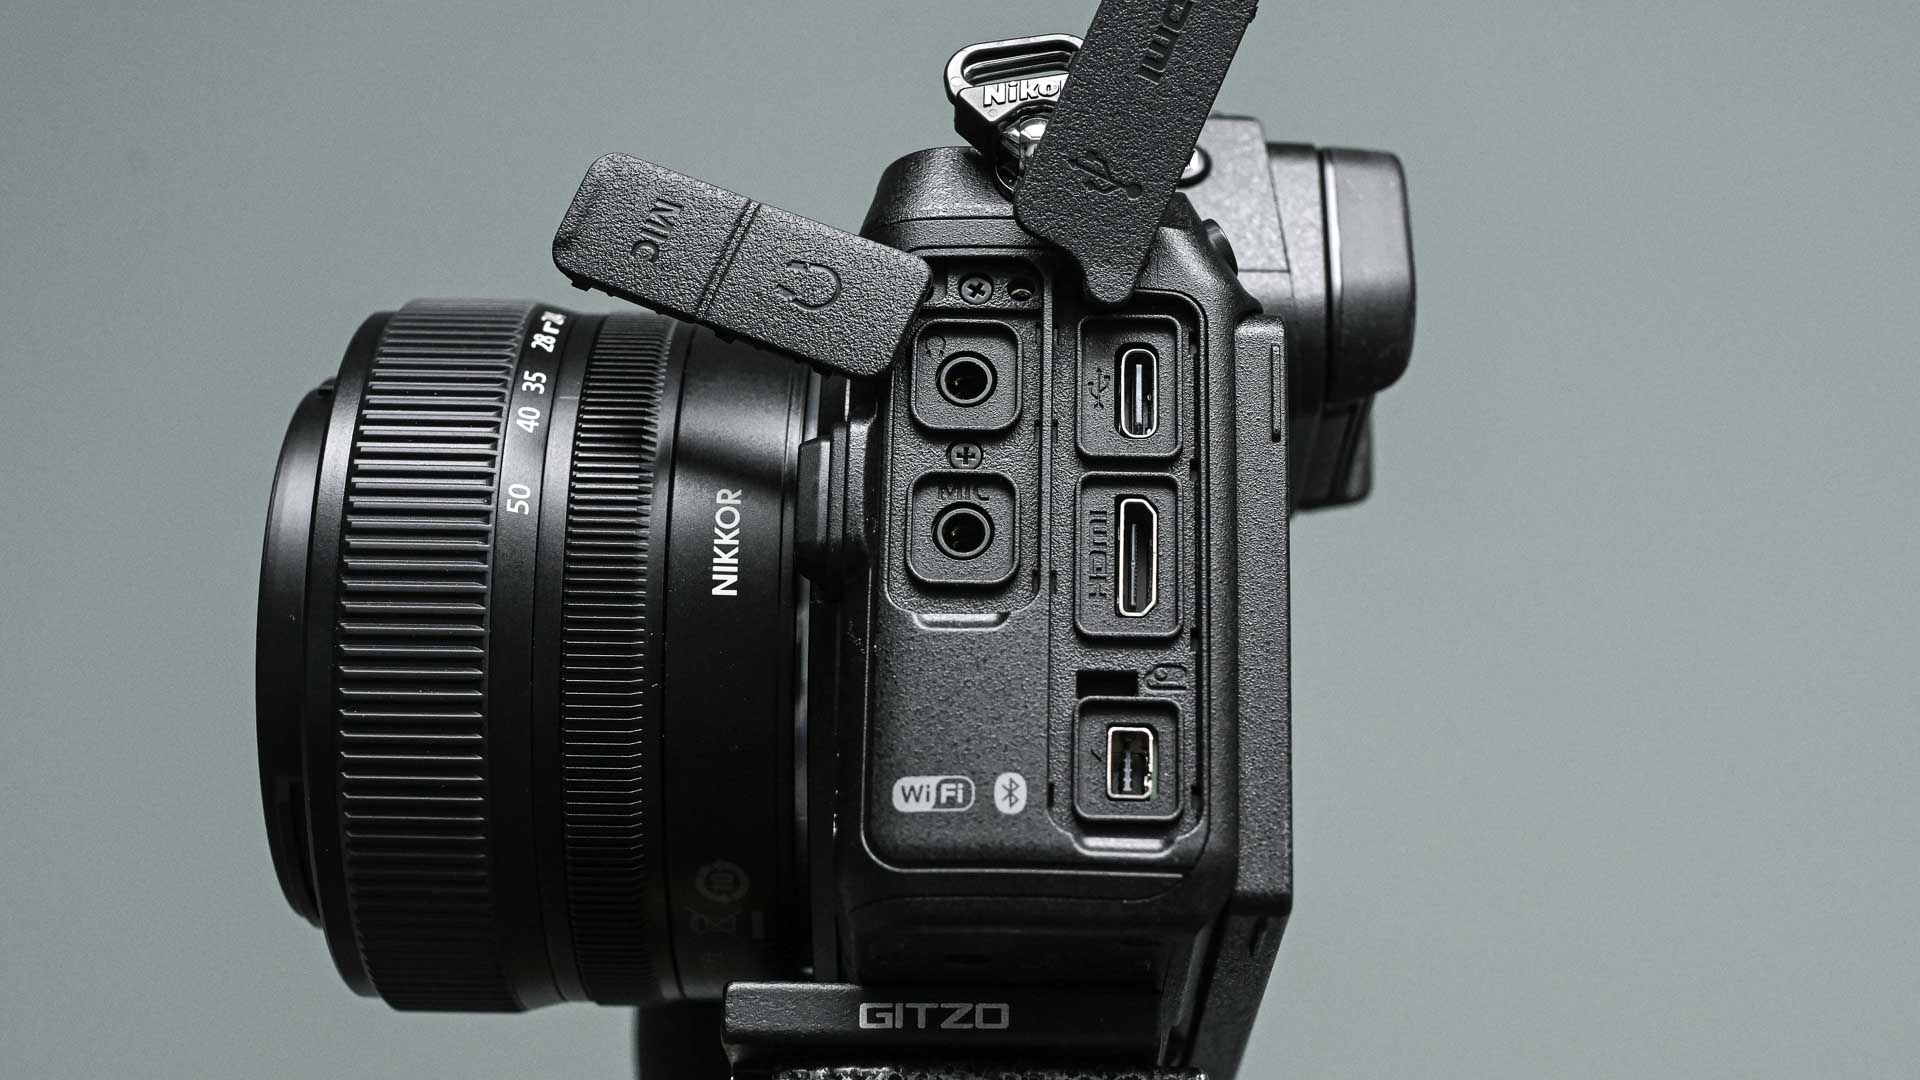 Nikon Z5 connections on side of body